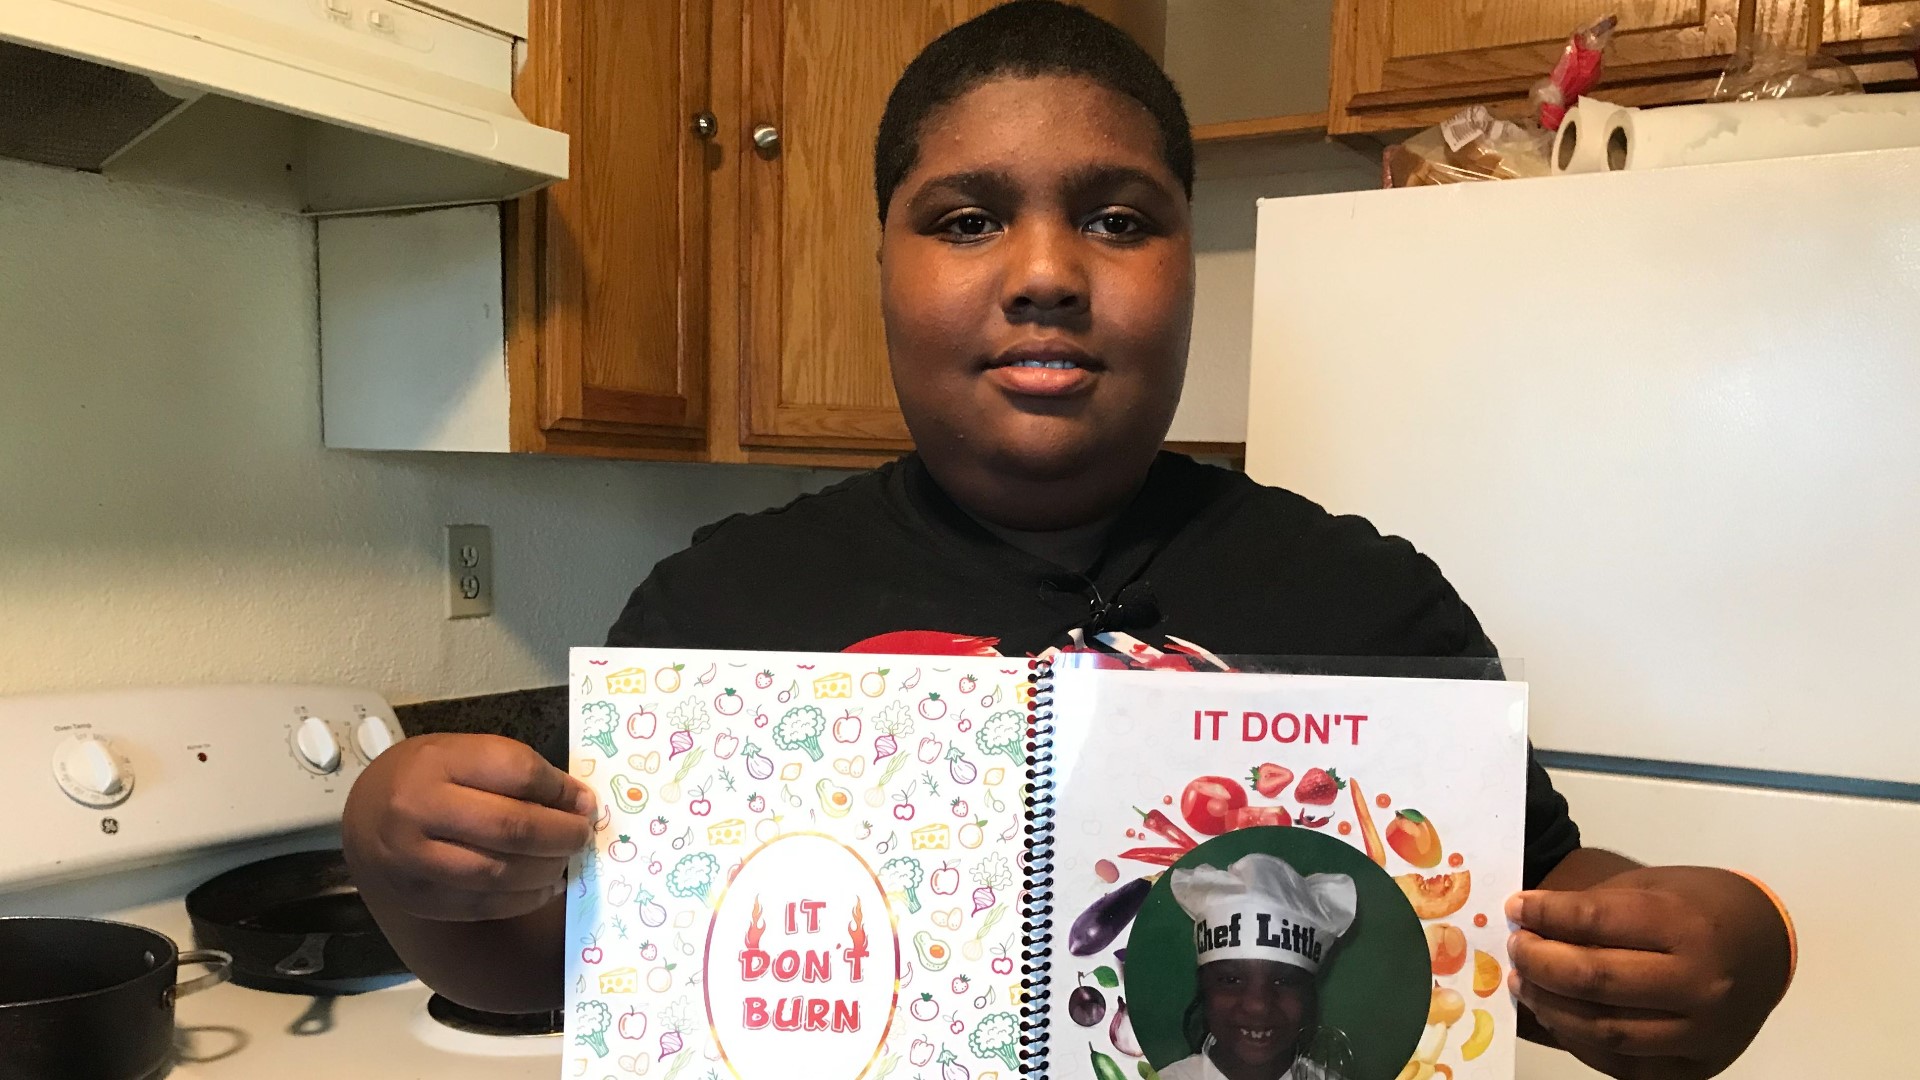 Ronald Carmon III was burned when he was 2-years-old. Now at 12, he wants to help the hospital that helped him. And maybe even prevent an accident like his.